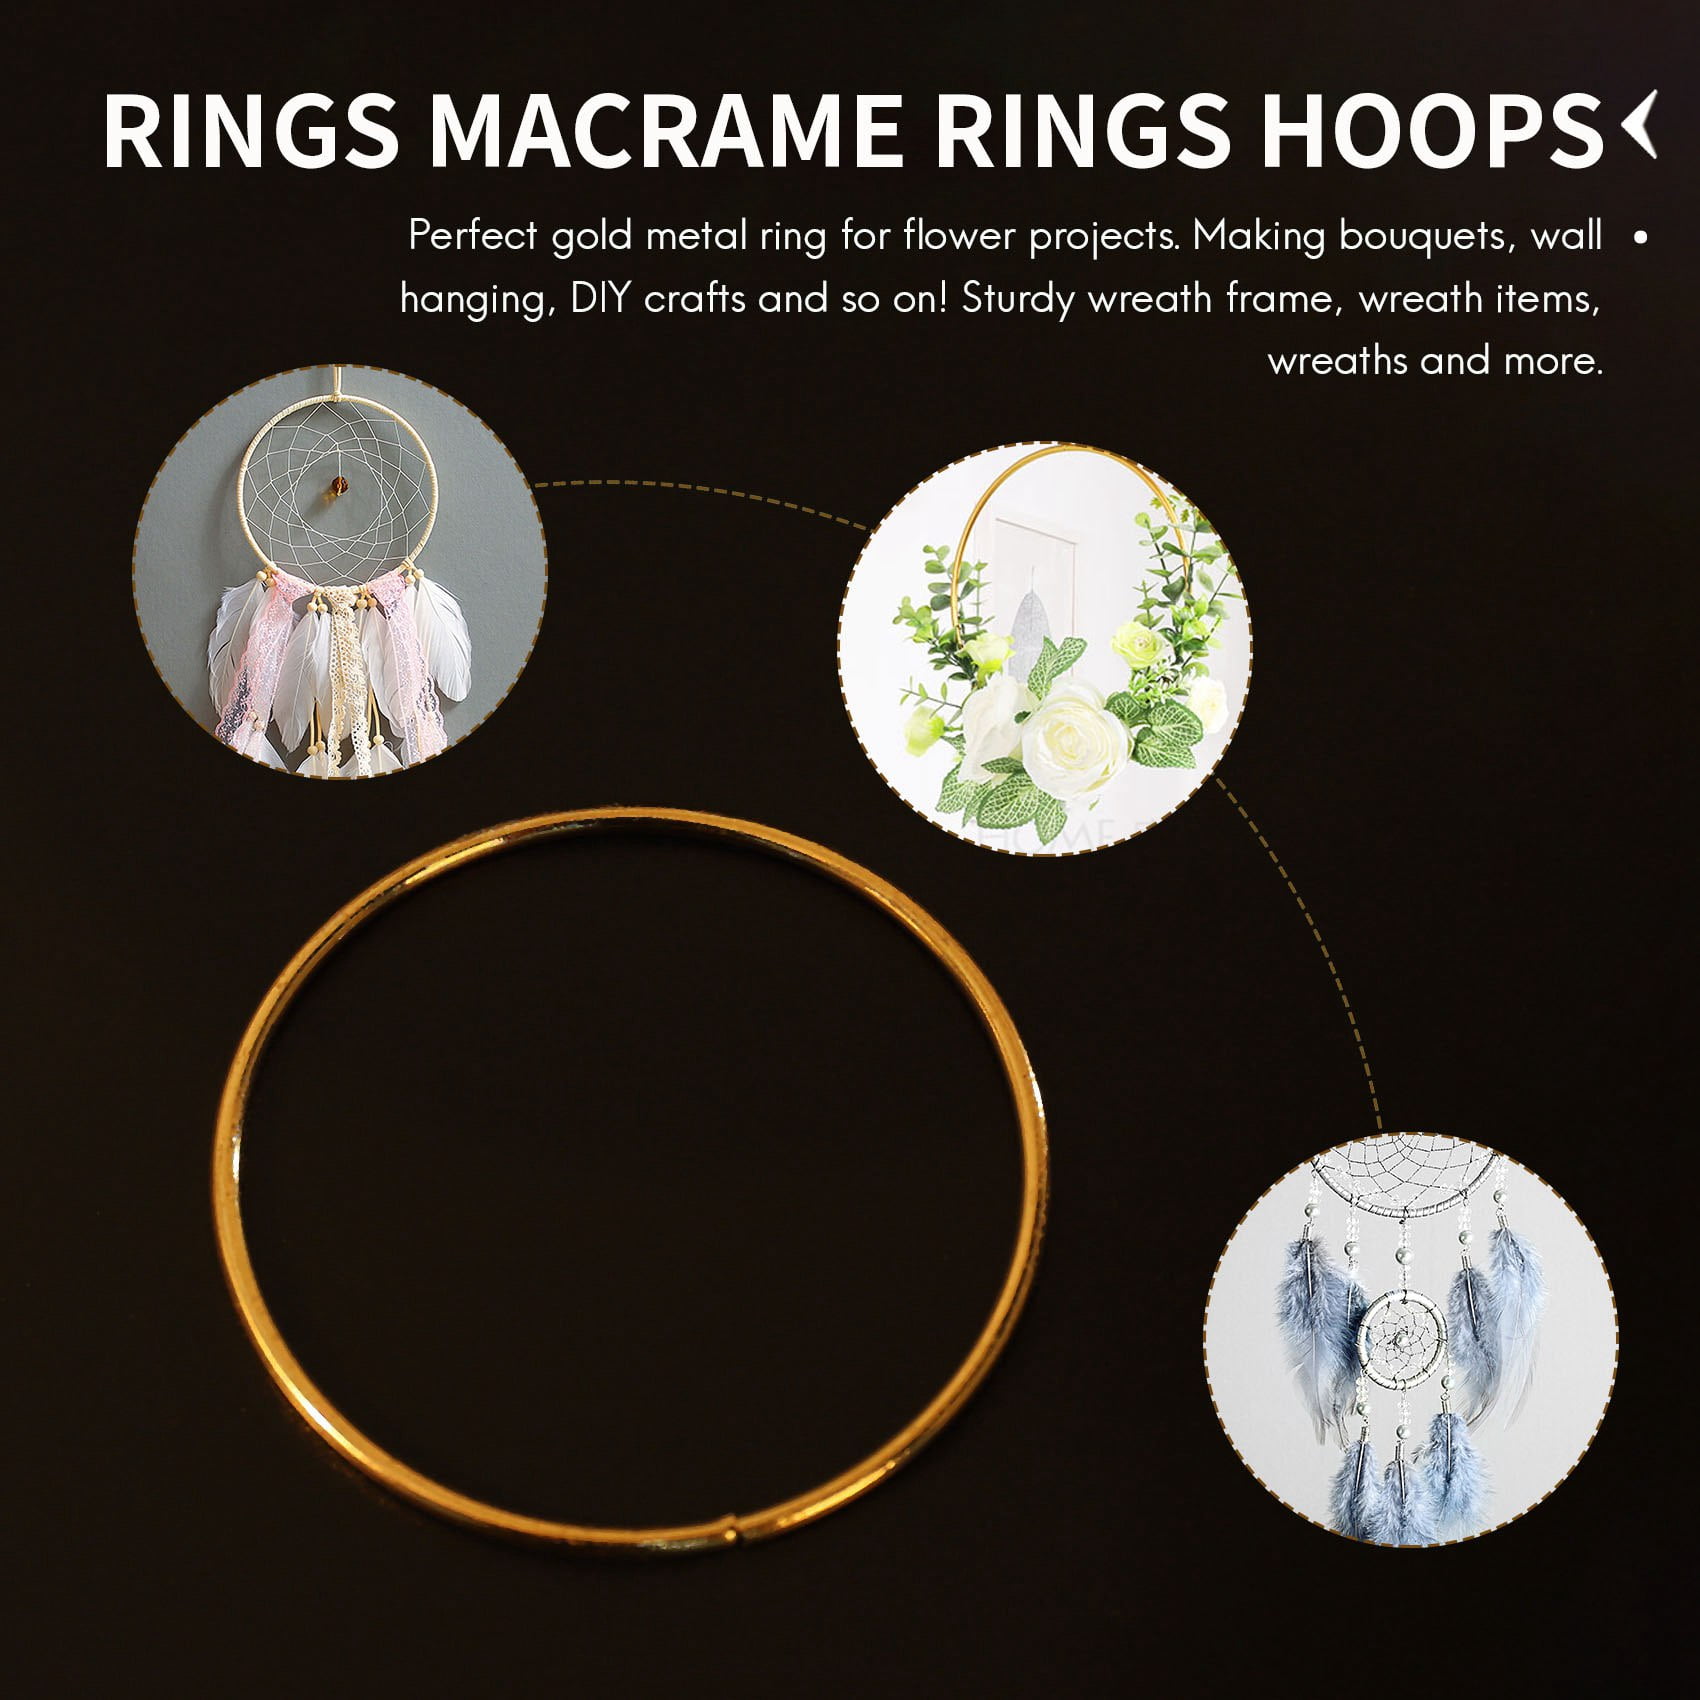 10 Pcs 2.5 Inch Dream Catcher Rings Metal Craft Rings Hoops Gold Macrame  Hoops Rings for Macrame,DIY Craft and Dream Catcher Supplies